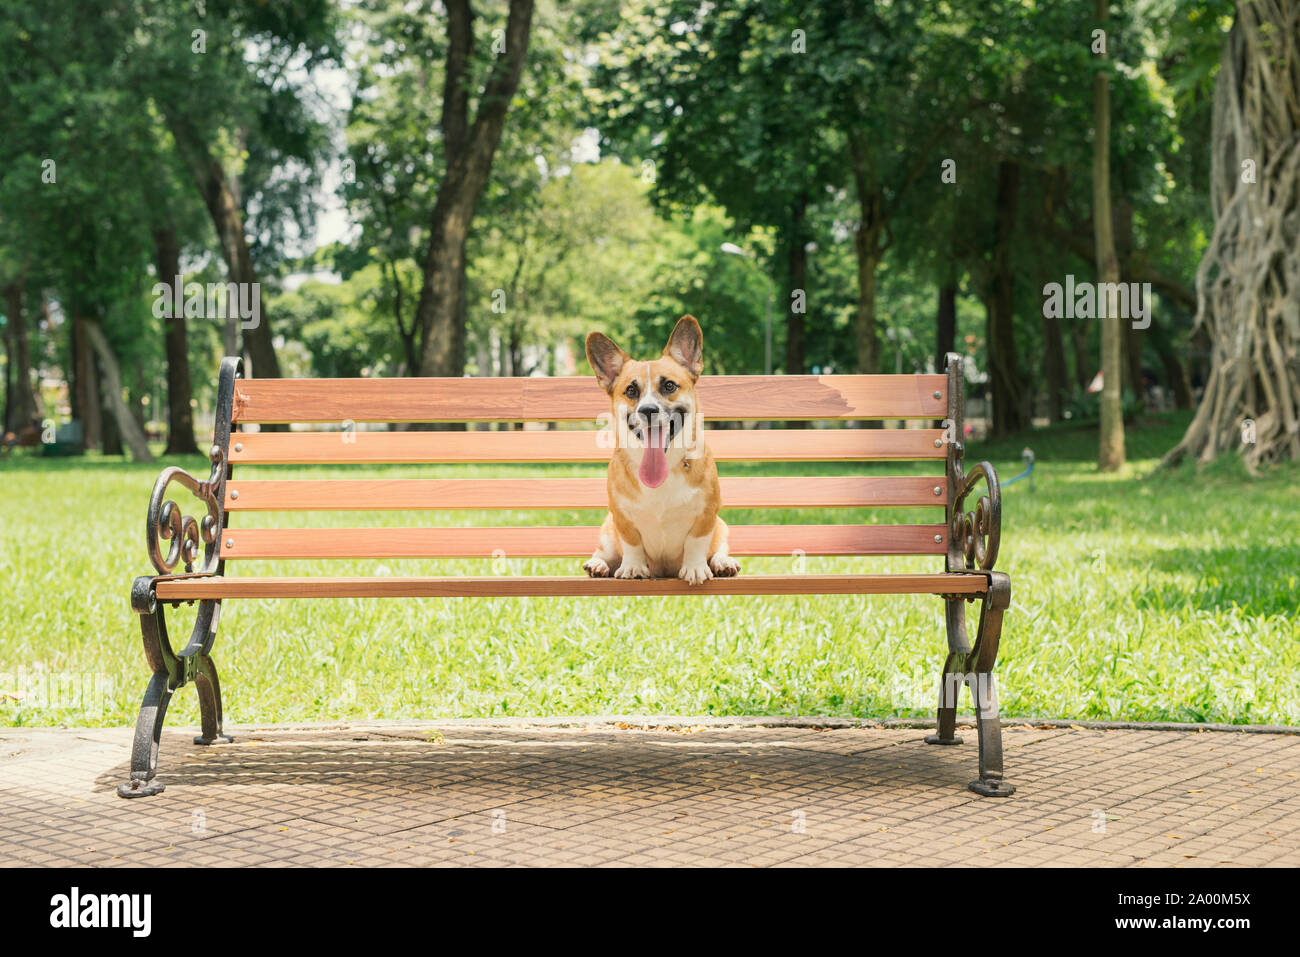 Cute Pembroke Welsh Corgi dog on a bench in the park Stock Photo